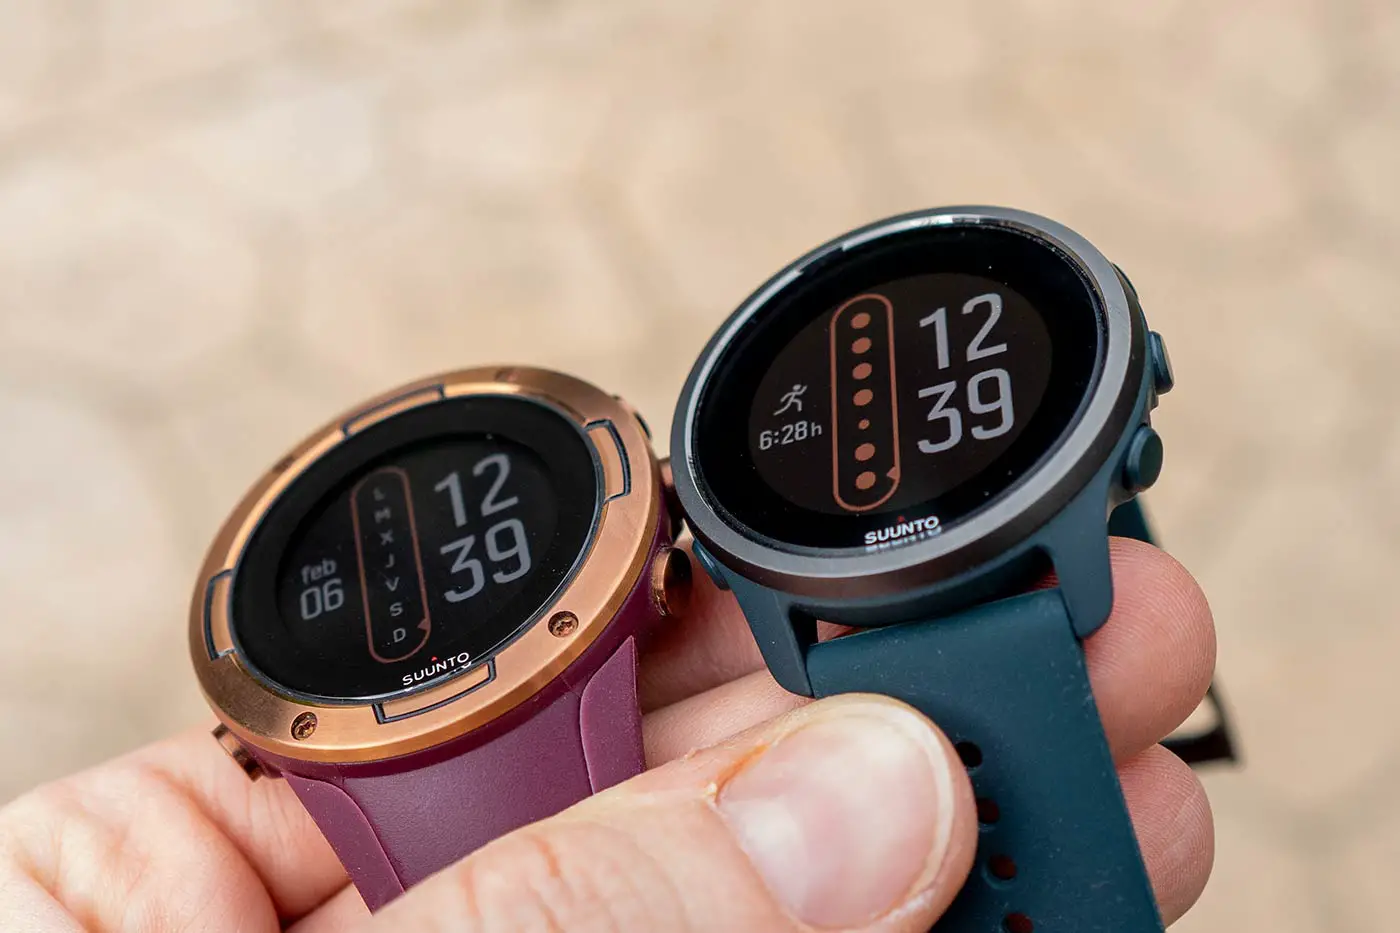 Suunto 5 Peak | Review, features, performance and opinion - Correr 